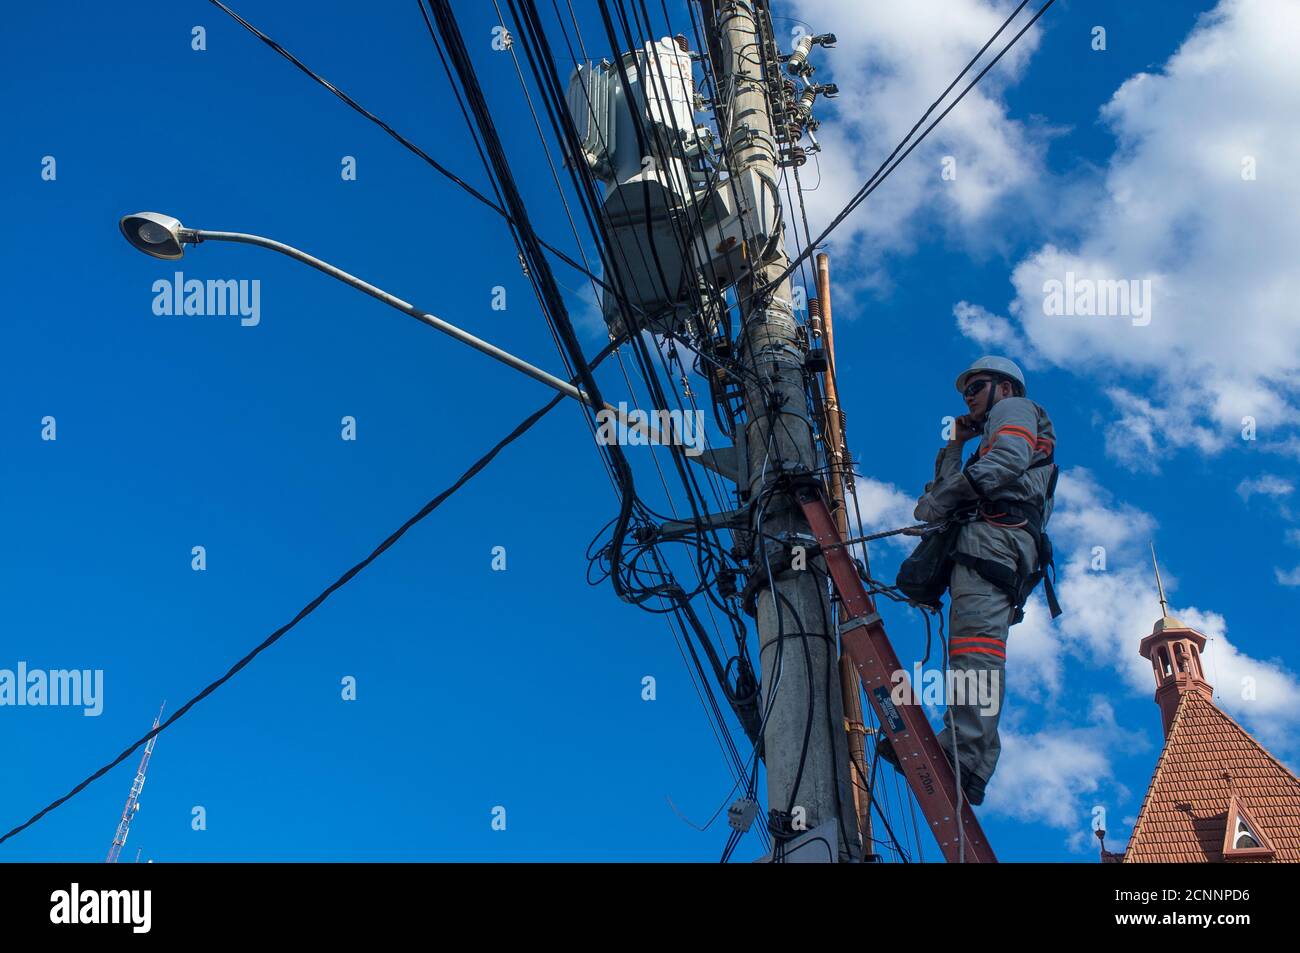 Worker of the electricity distribution company on top of utility pole. Stock Photo